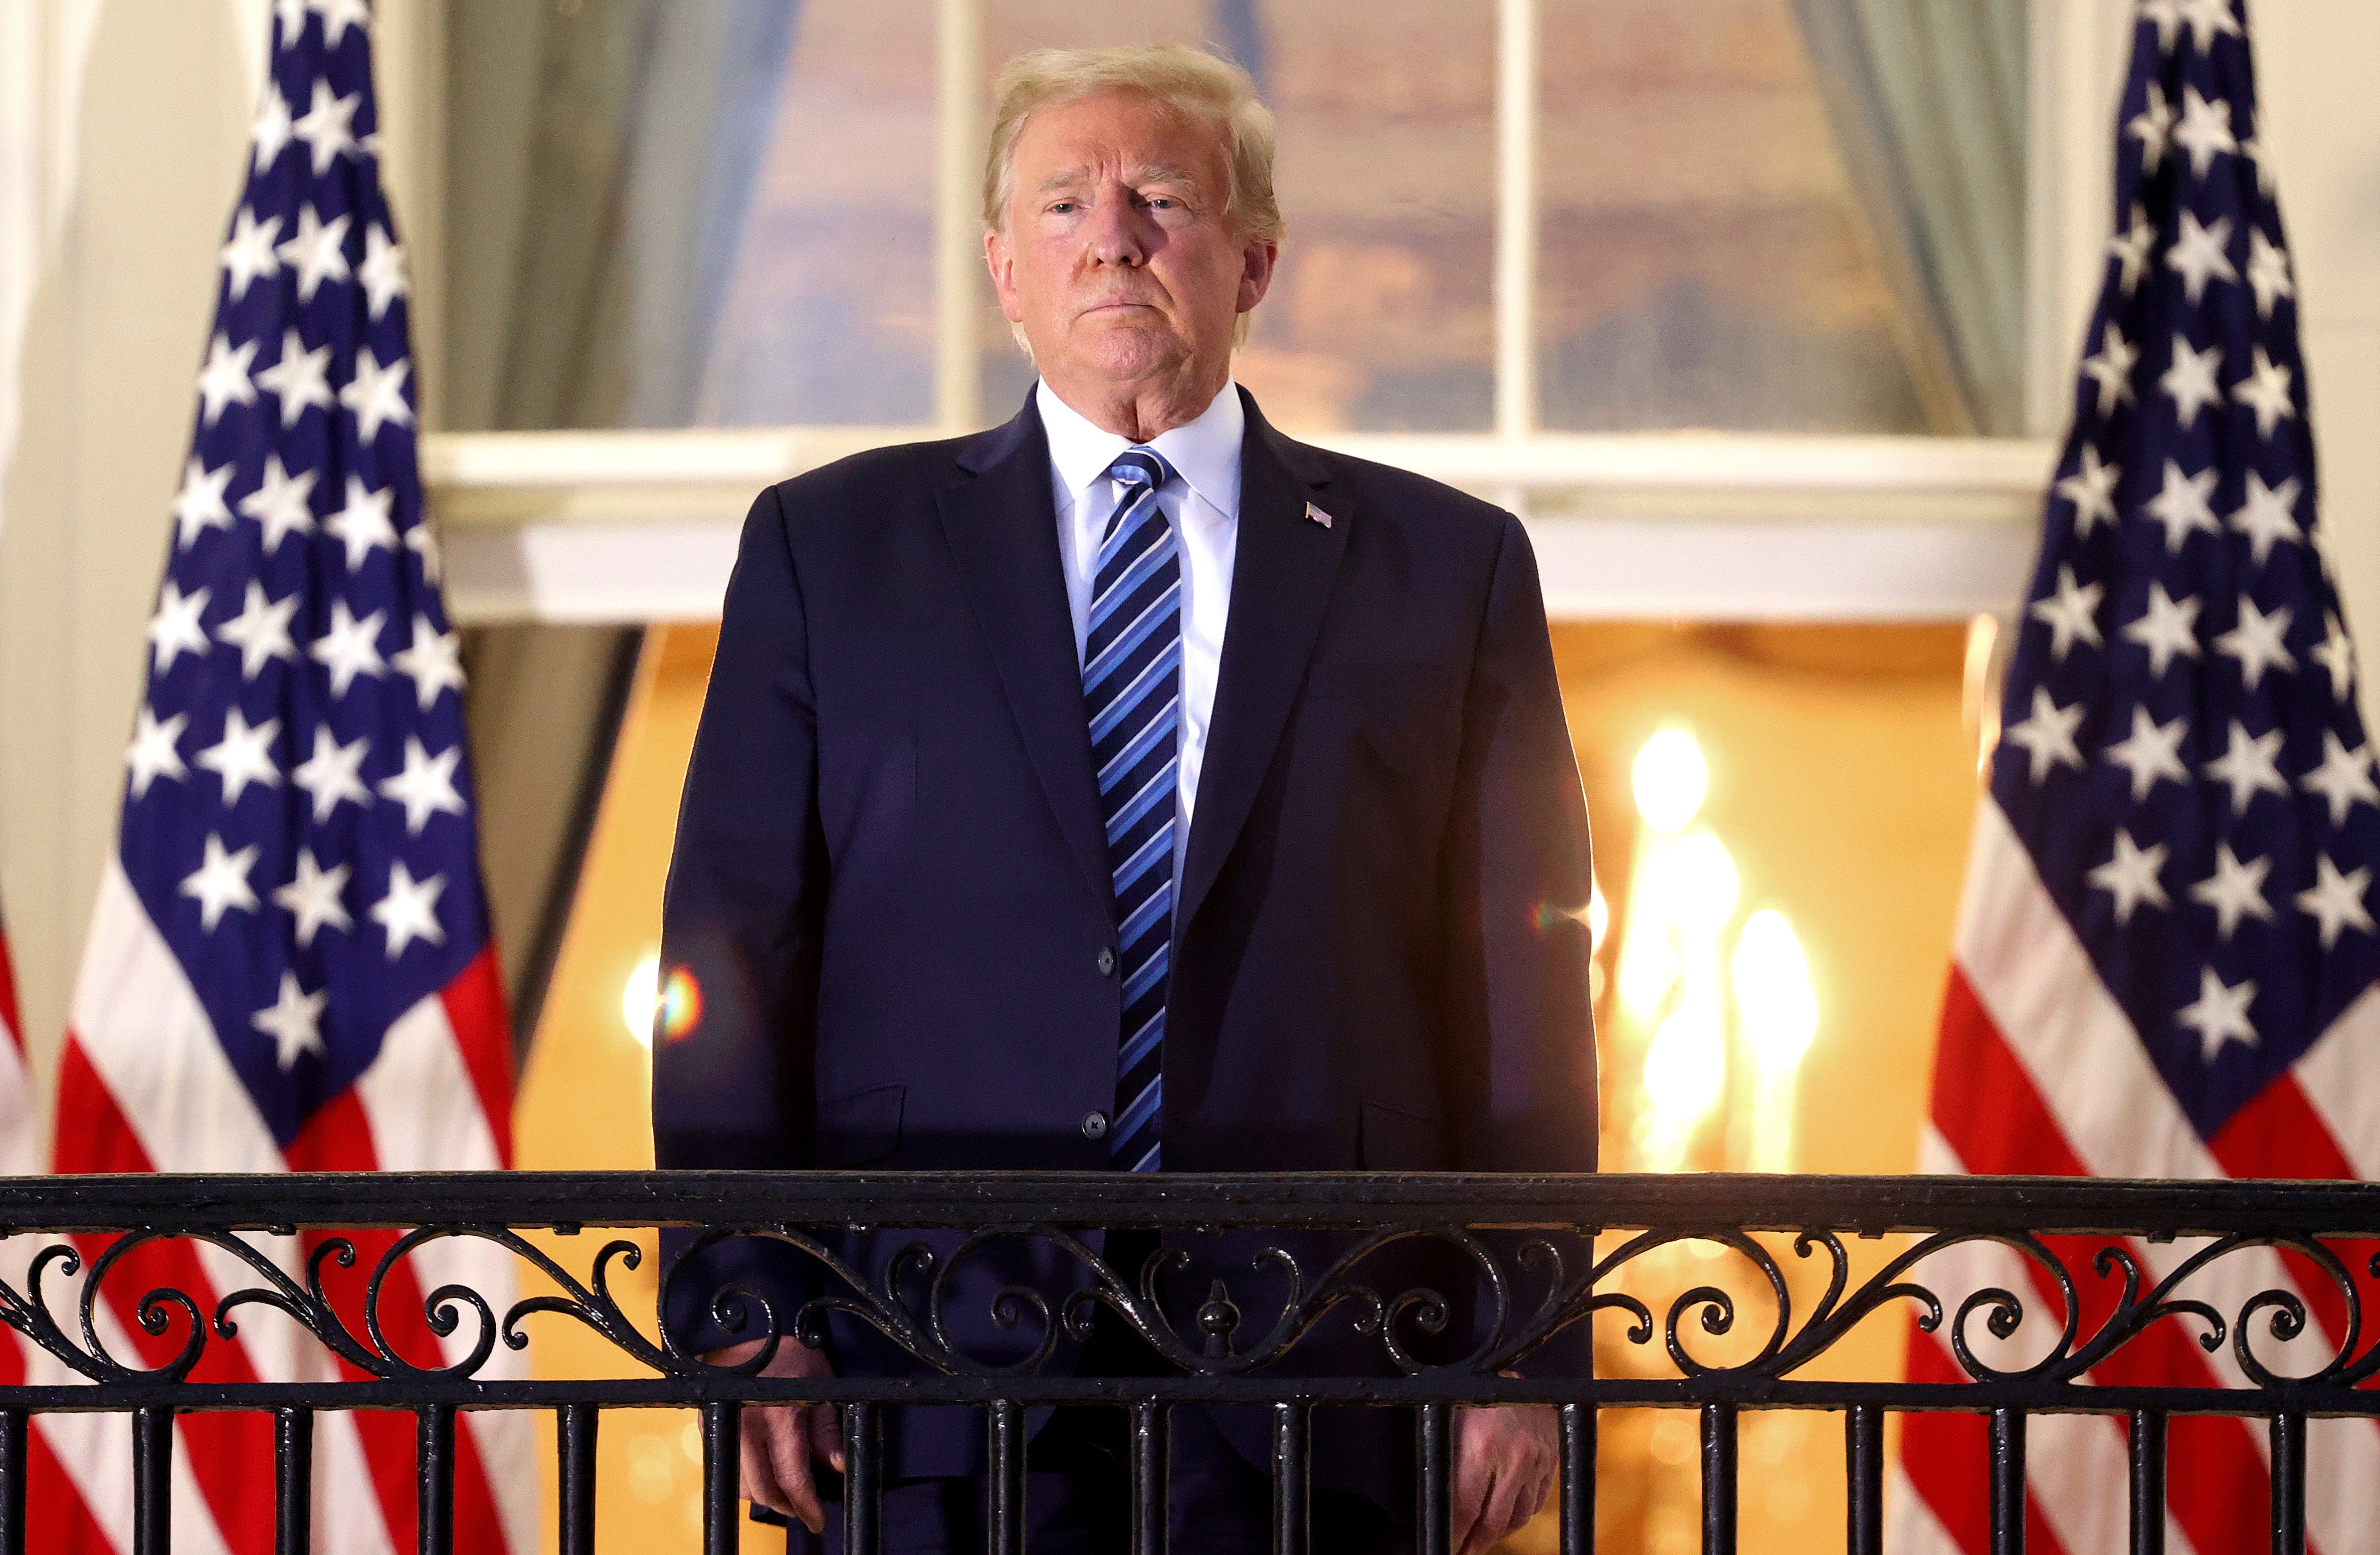 Donald Trump stands on the Truman Balcony